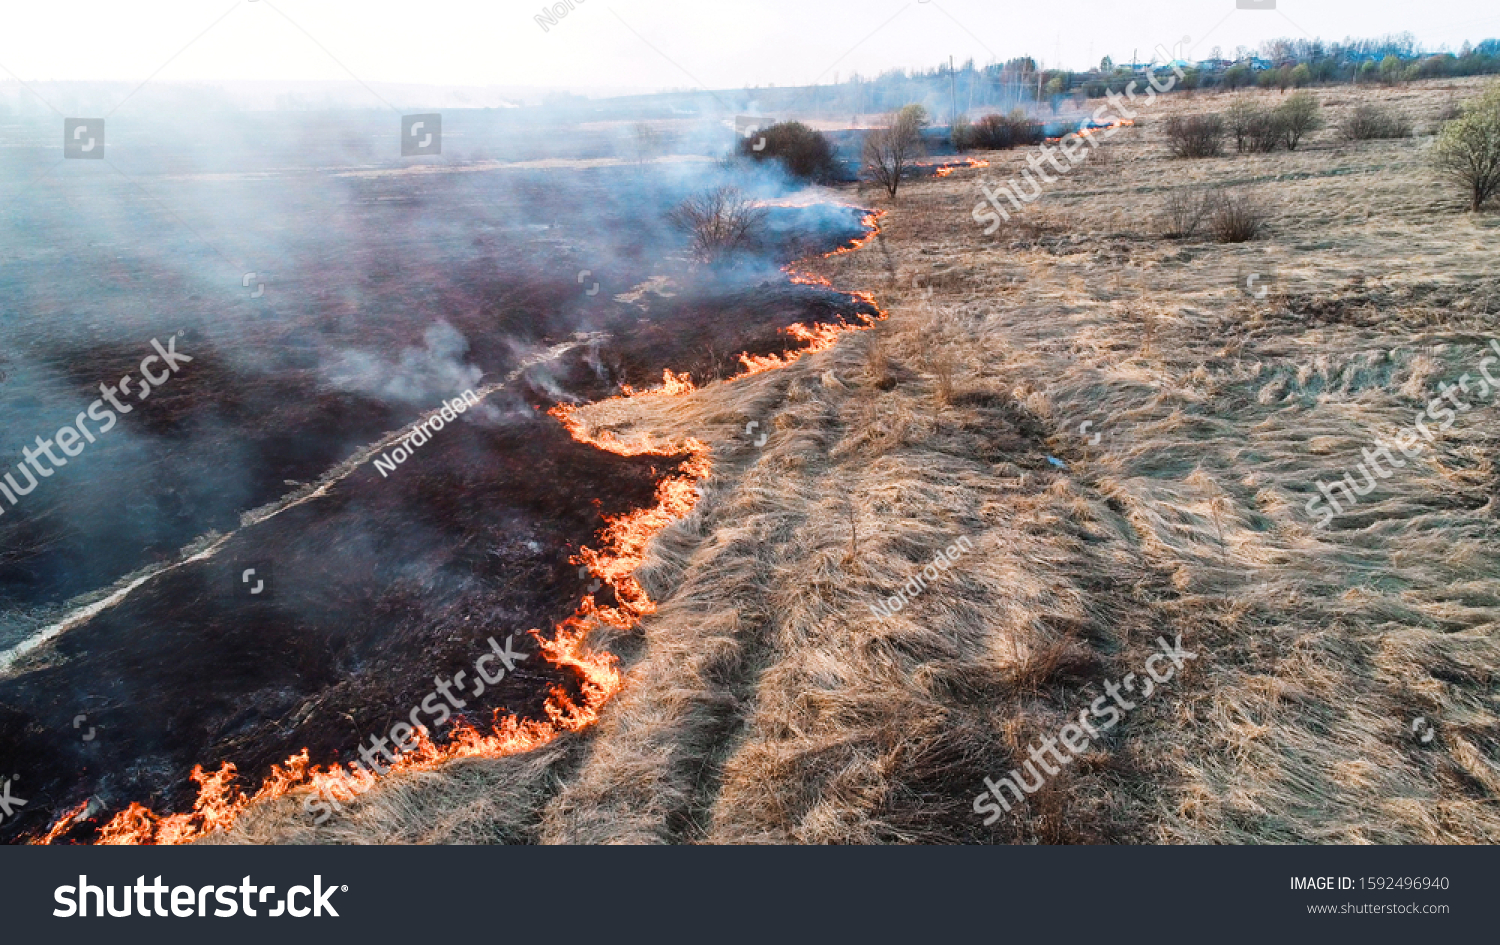 Forest and field fire. Dry grass burns, natural disaster. Aerial view. Strong fire in an empty field, strong smoke from a burning place. Flying over a fire at low altitude. #1592496940